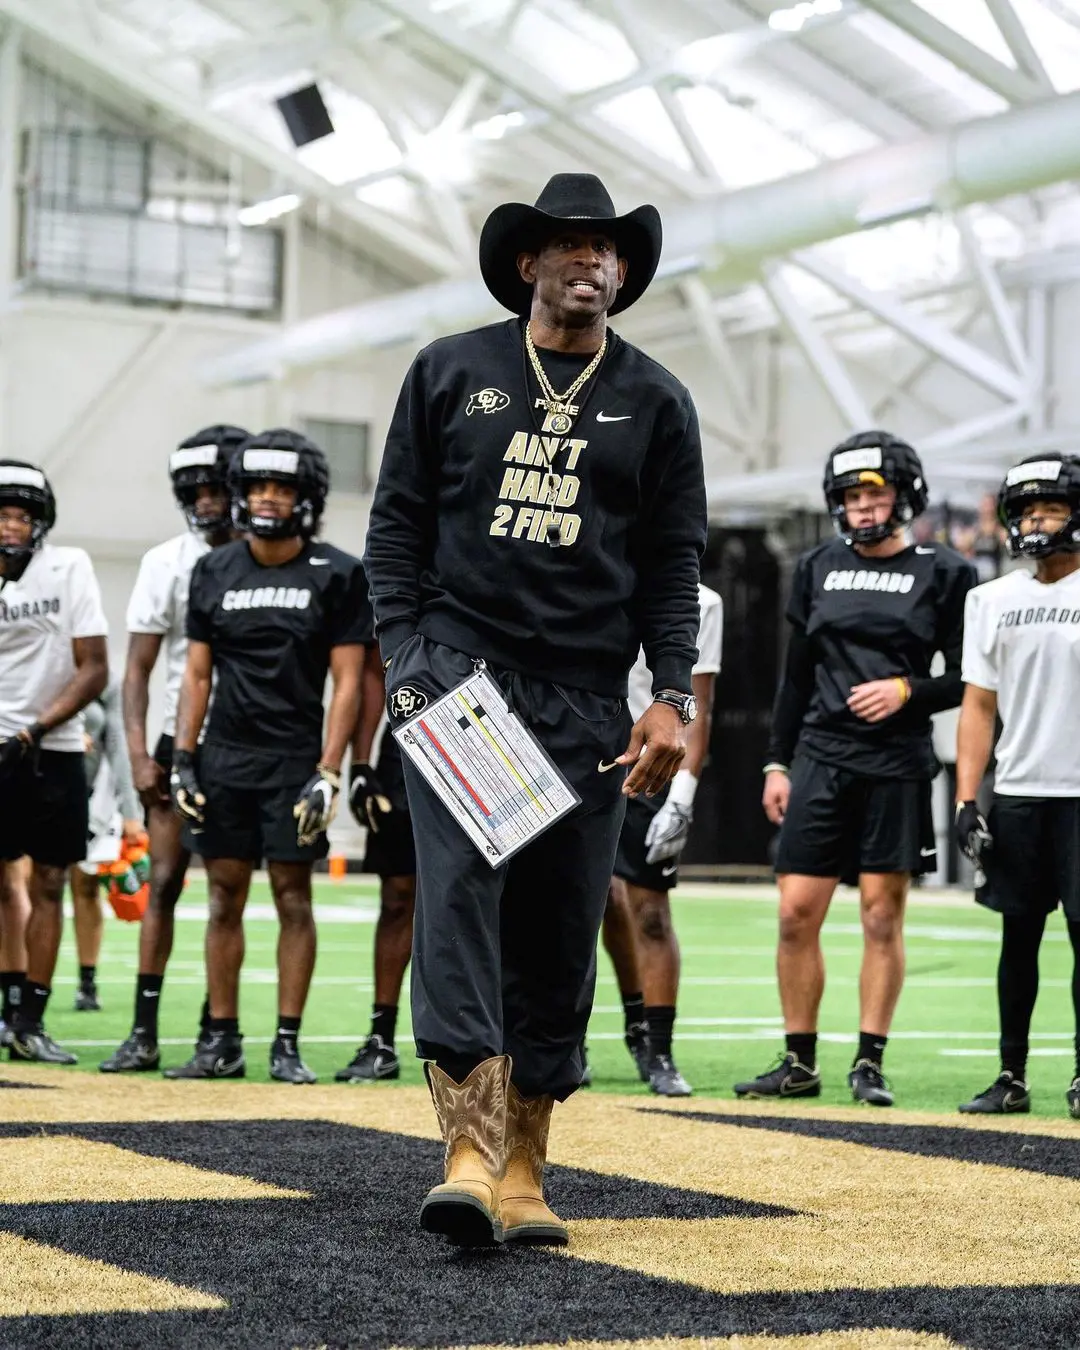 Sanders (Center in a hat) alongside Colorado football team mentoring them. He is one of the highest paid head coach in NCAA division one football